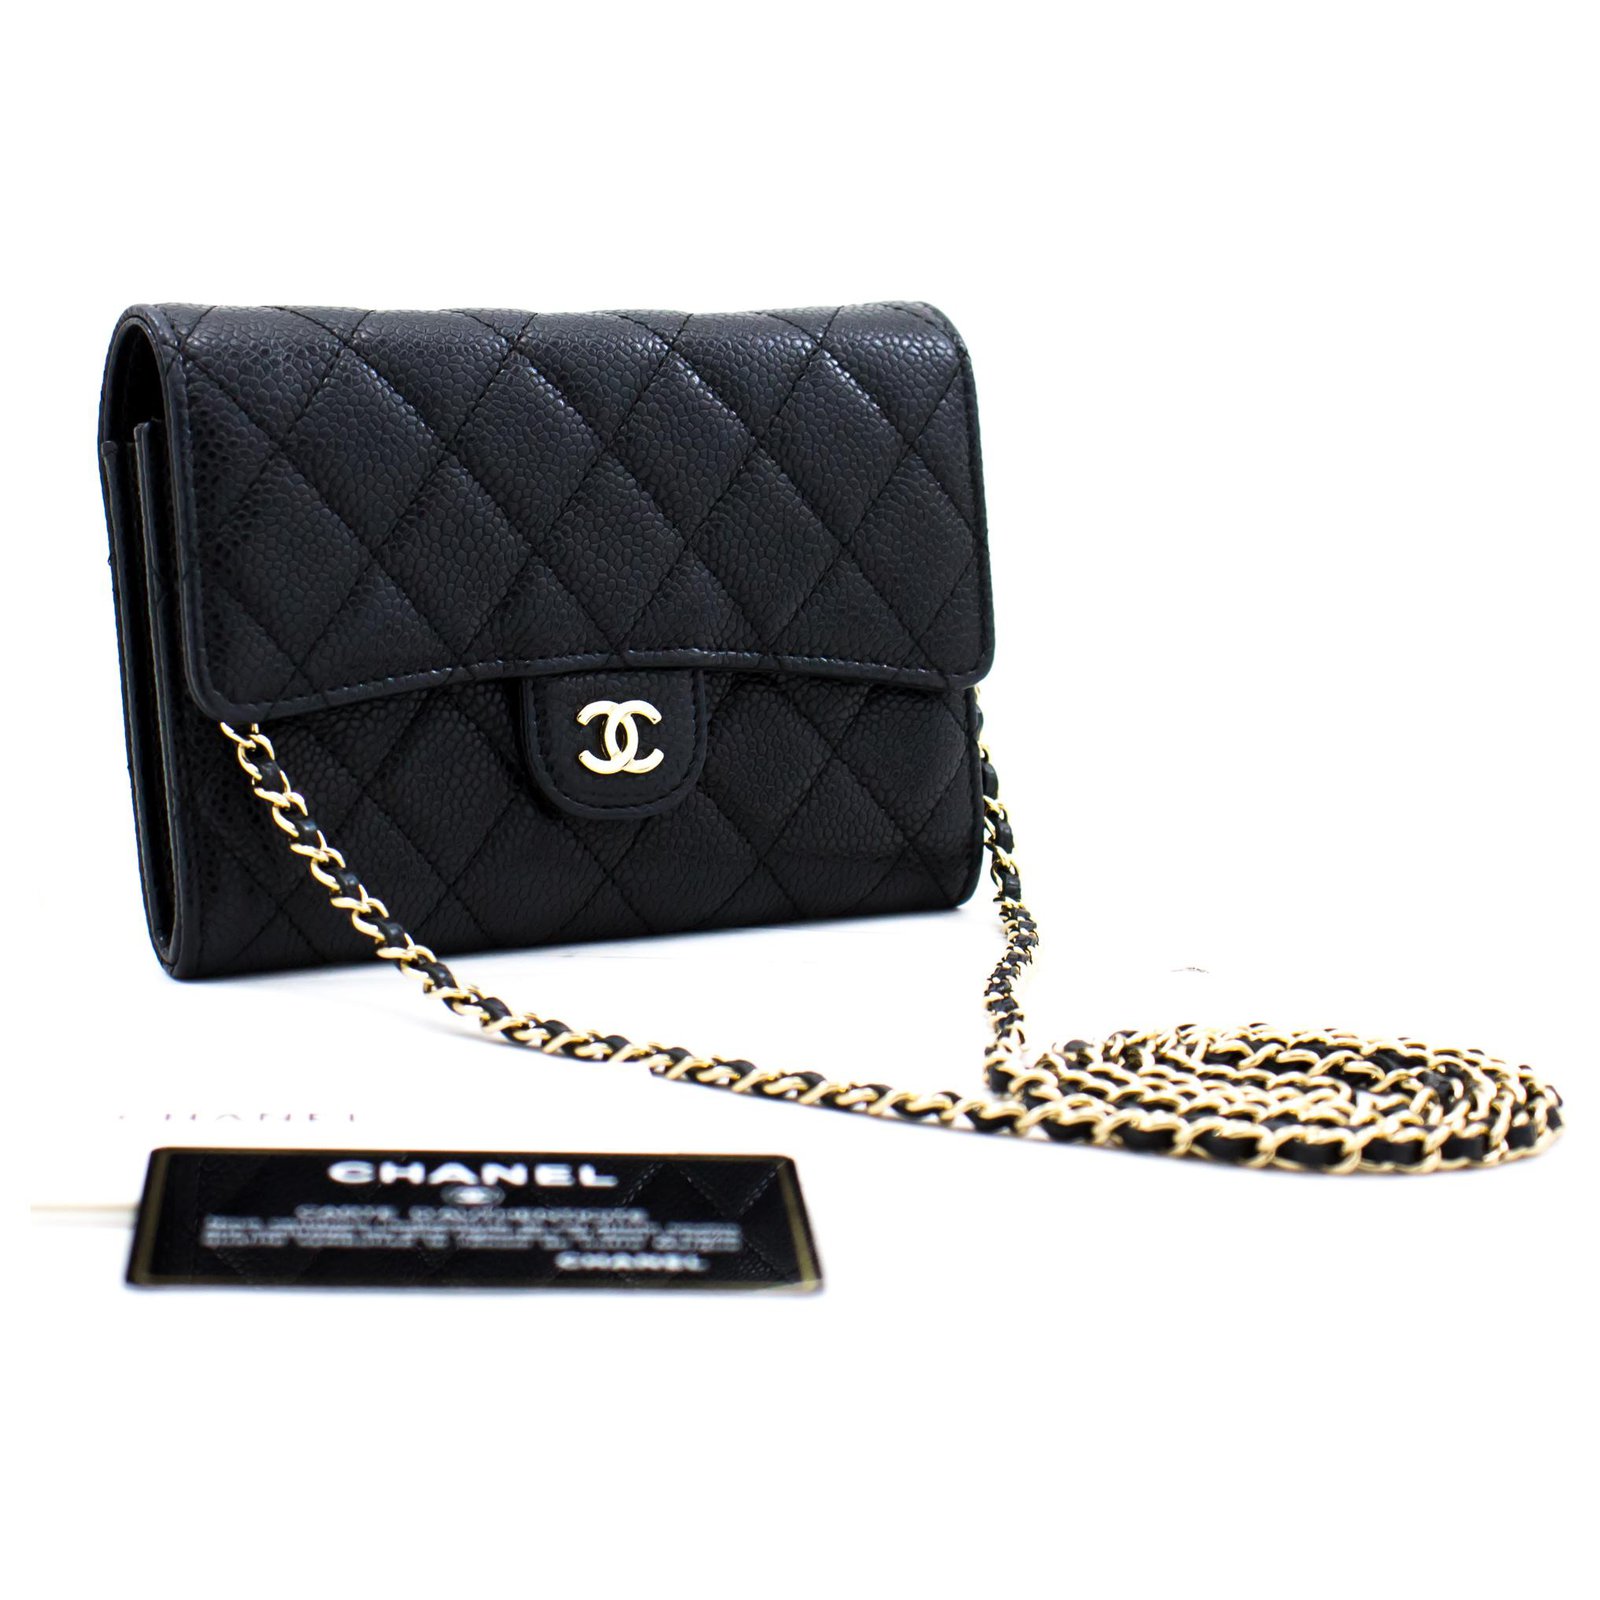 🦄 21K CHANEL Small Beige Mini WOC Wallet On Chain Card Coin Flap